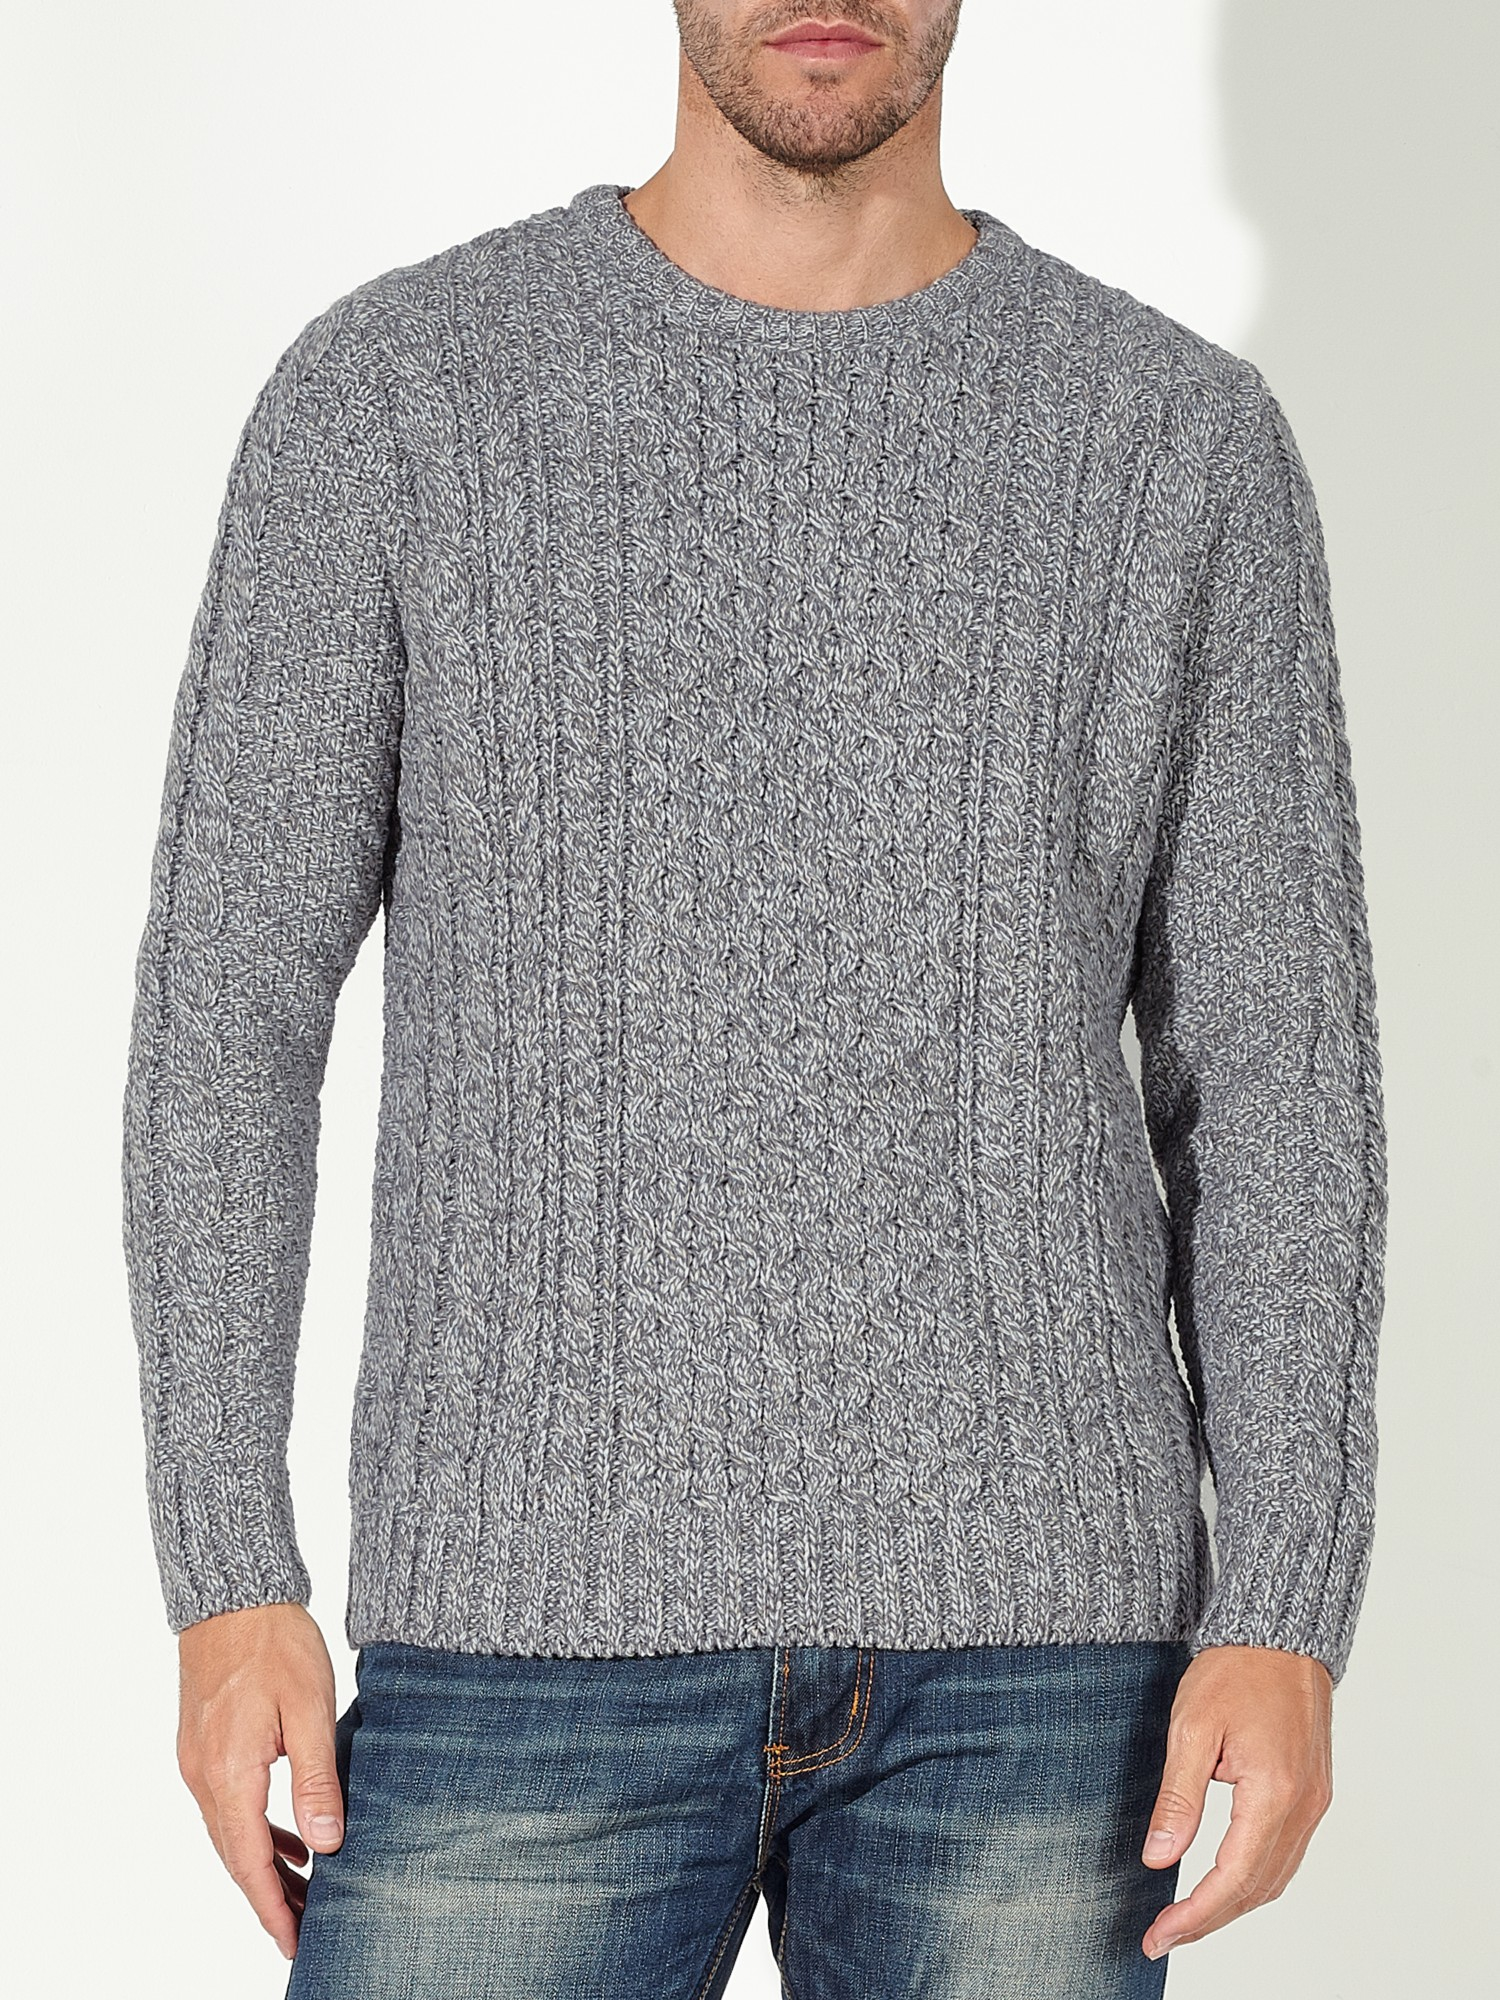 John lewis Made In England Cable Knit Wool Jumper in Gray for Men ...